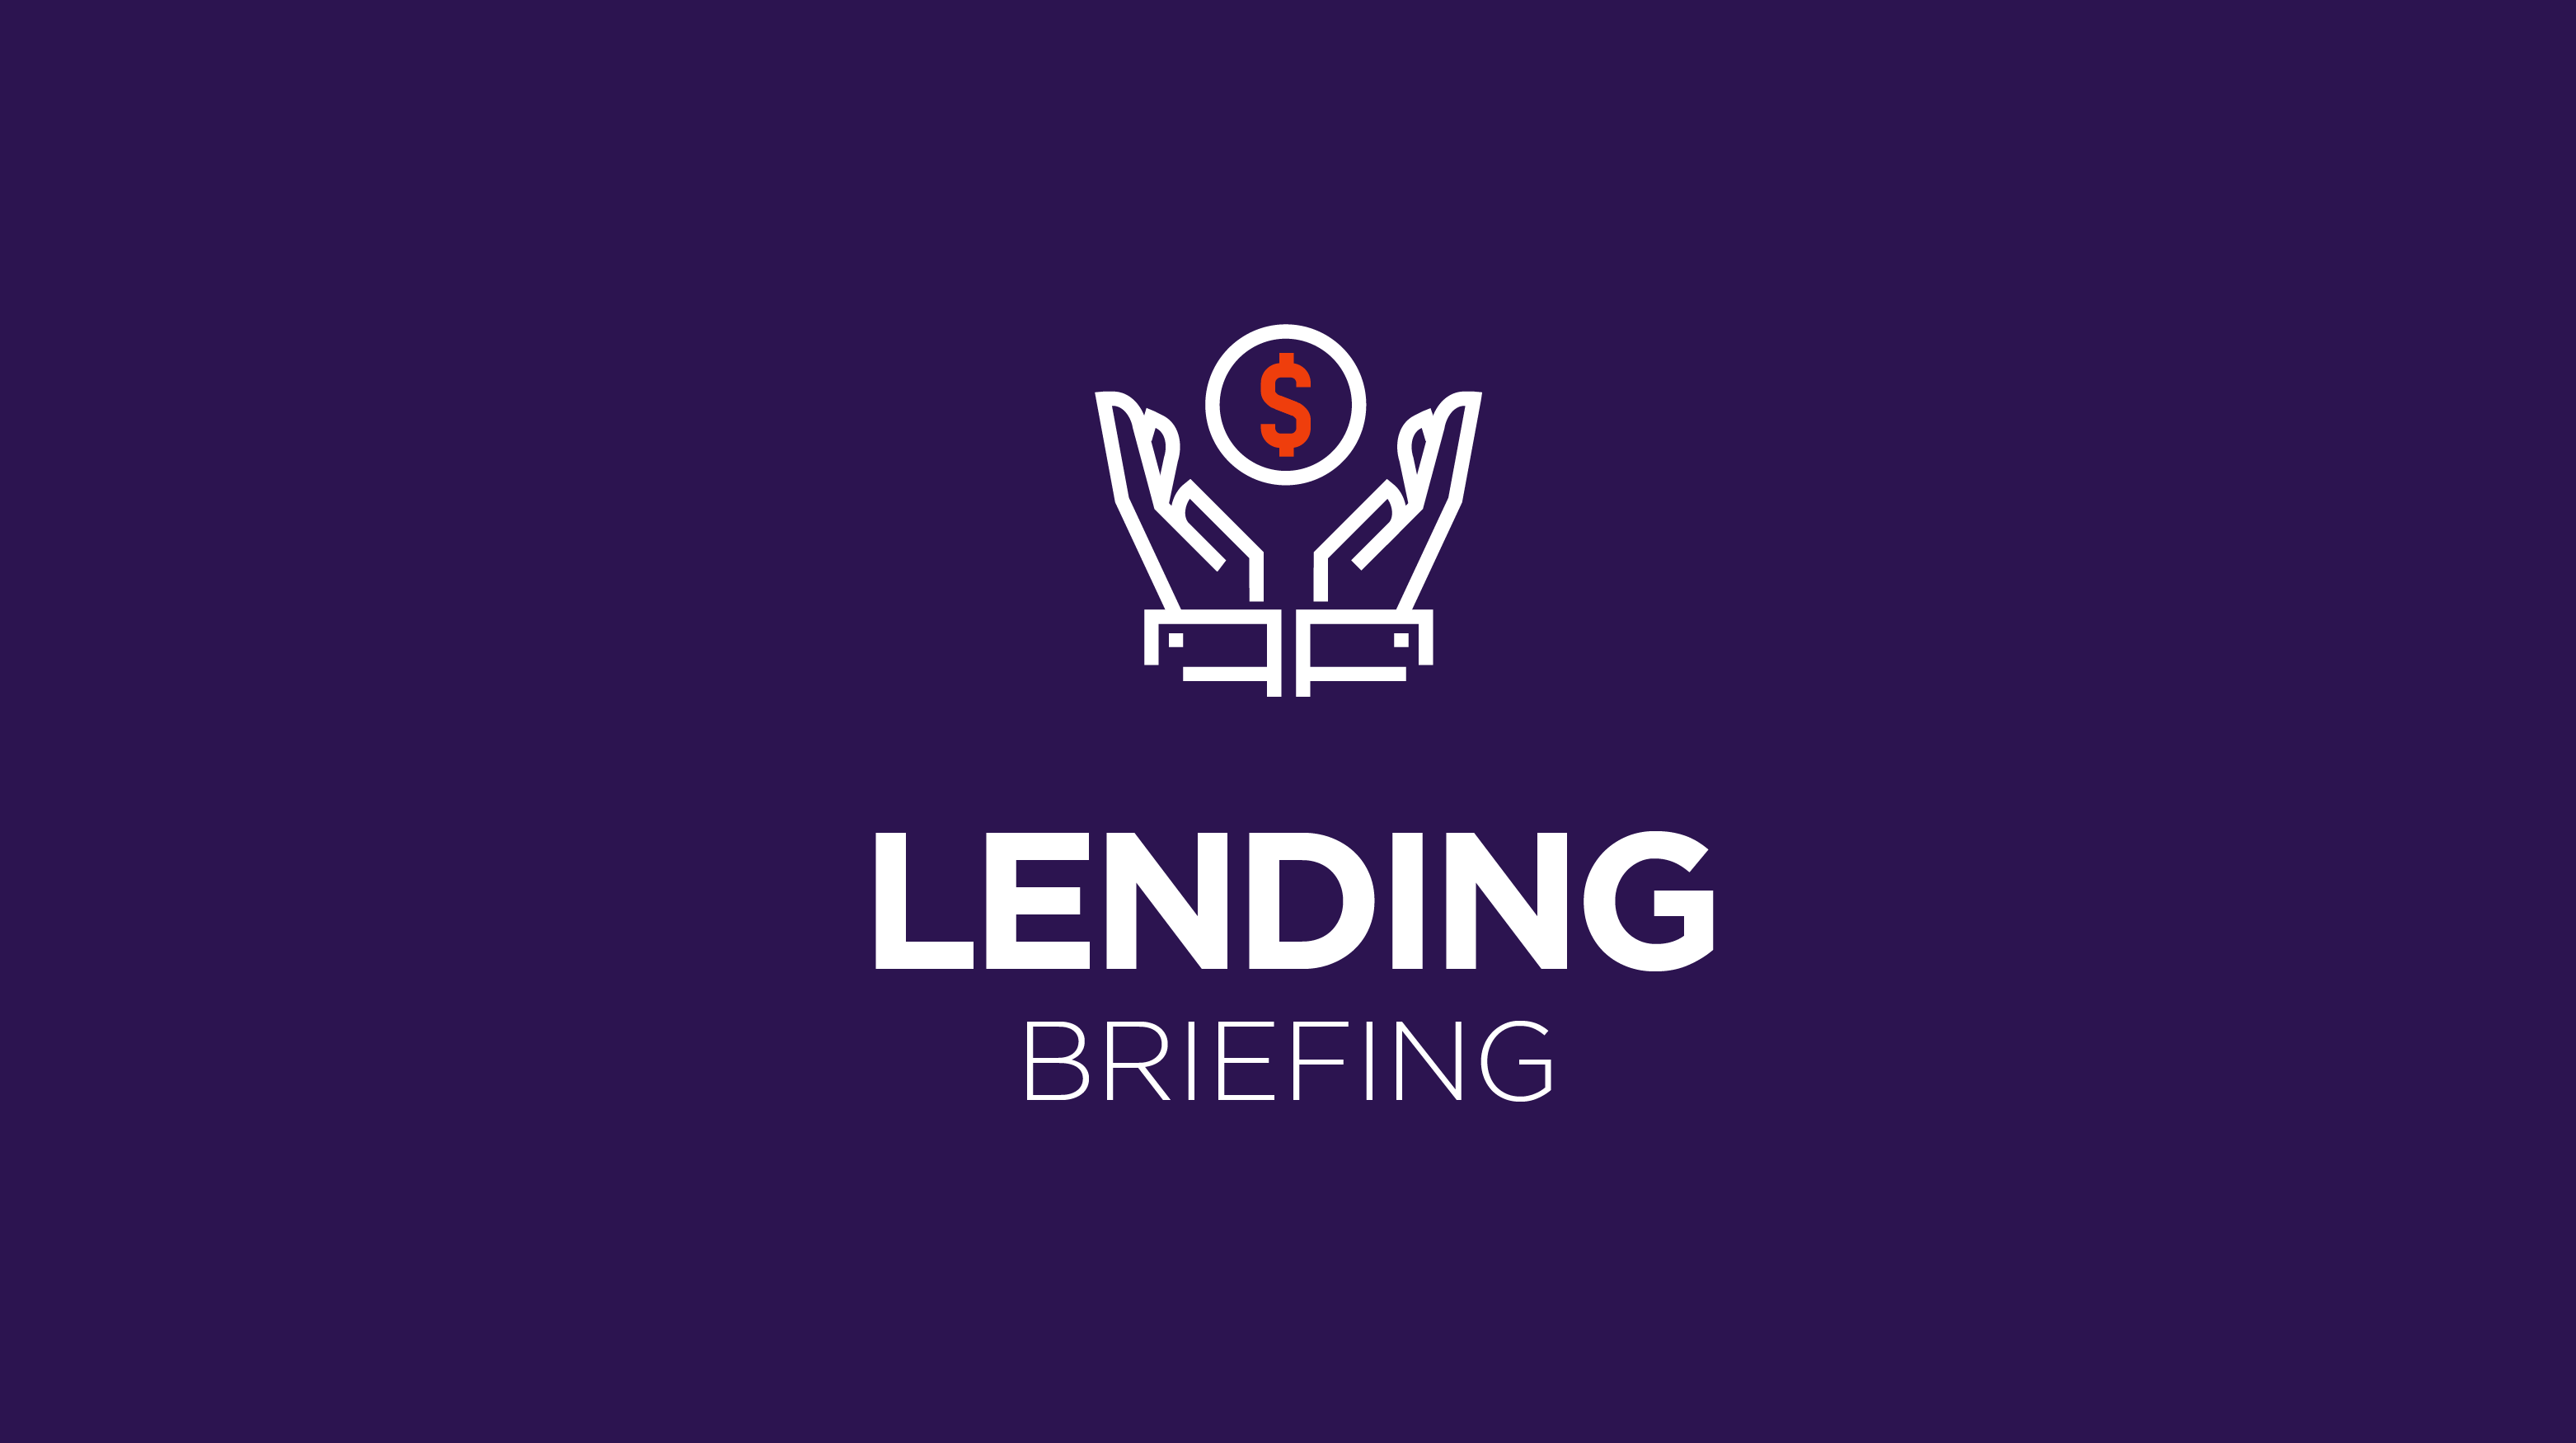 Lending Briefing: Customers would share data to improve their creditworthiness